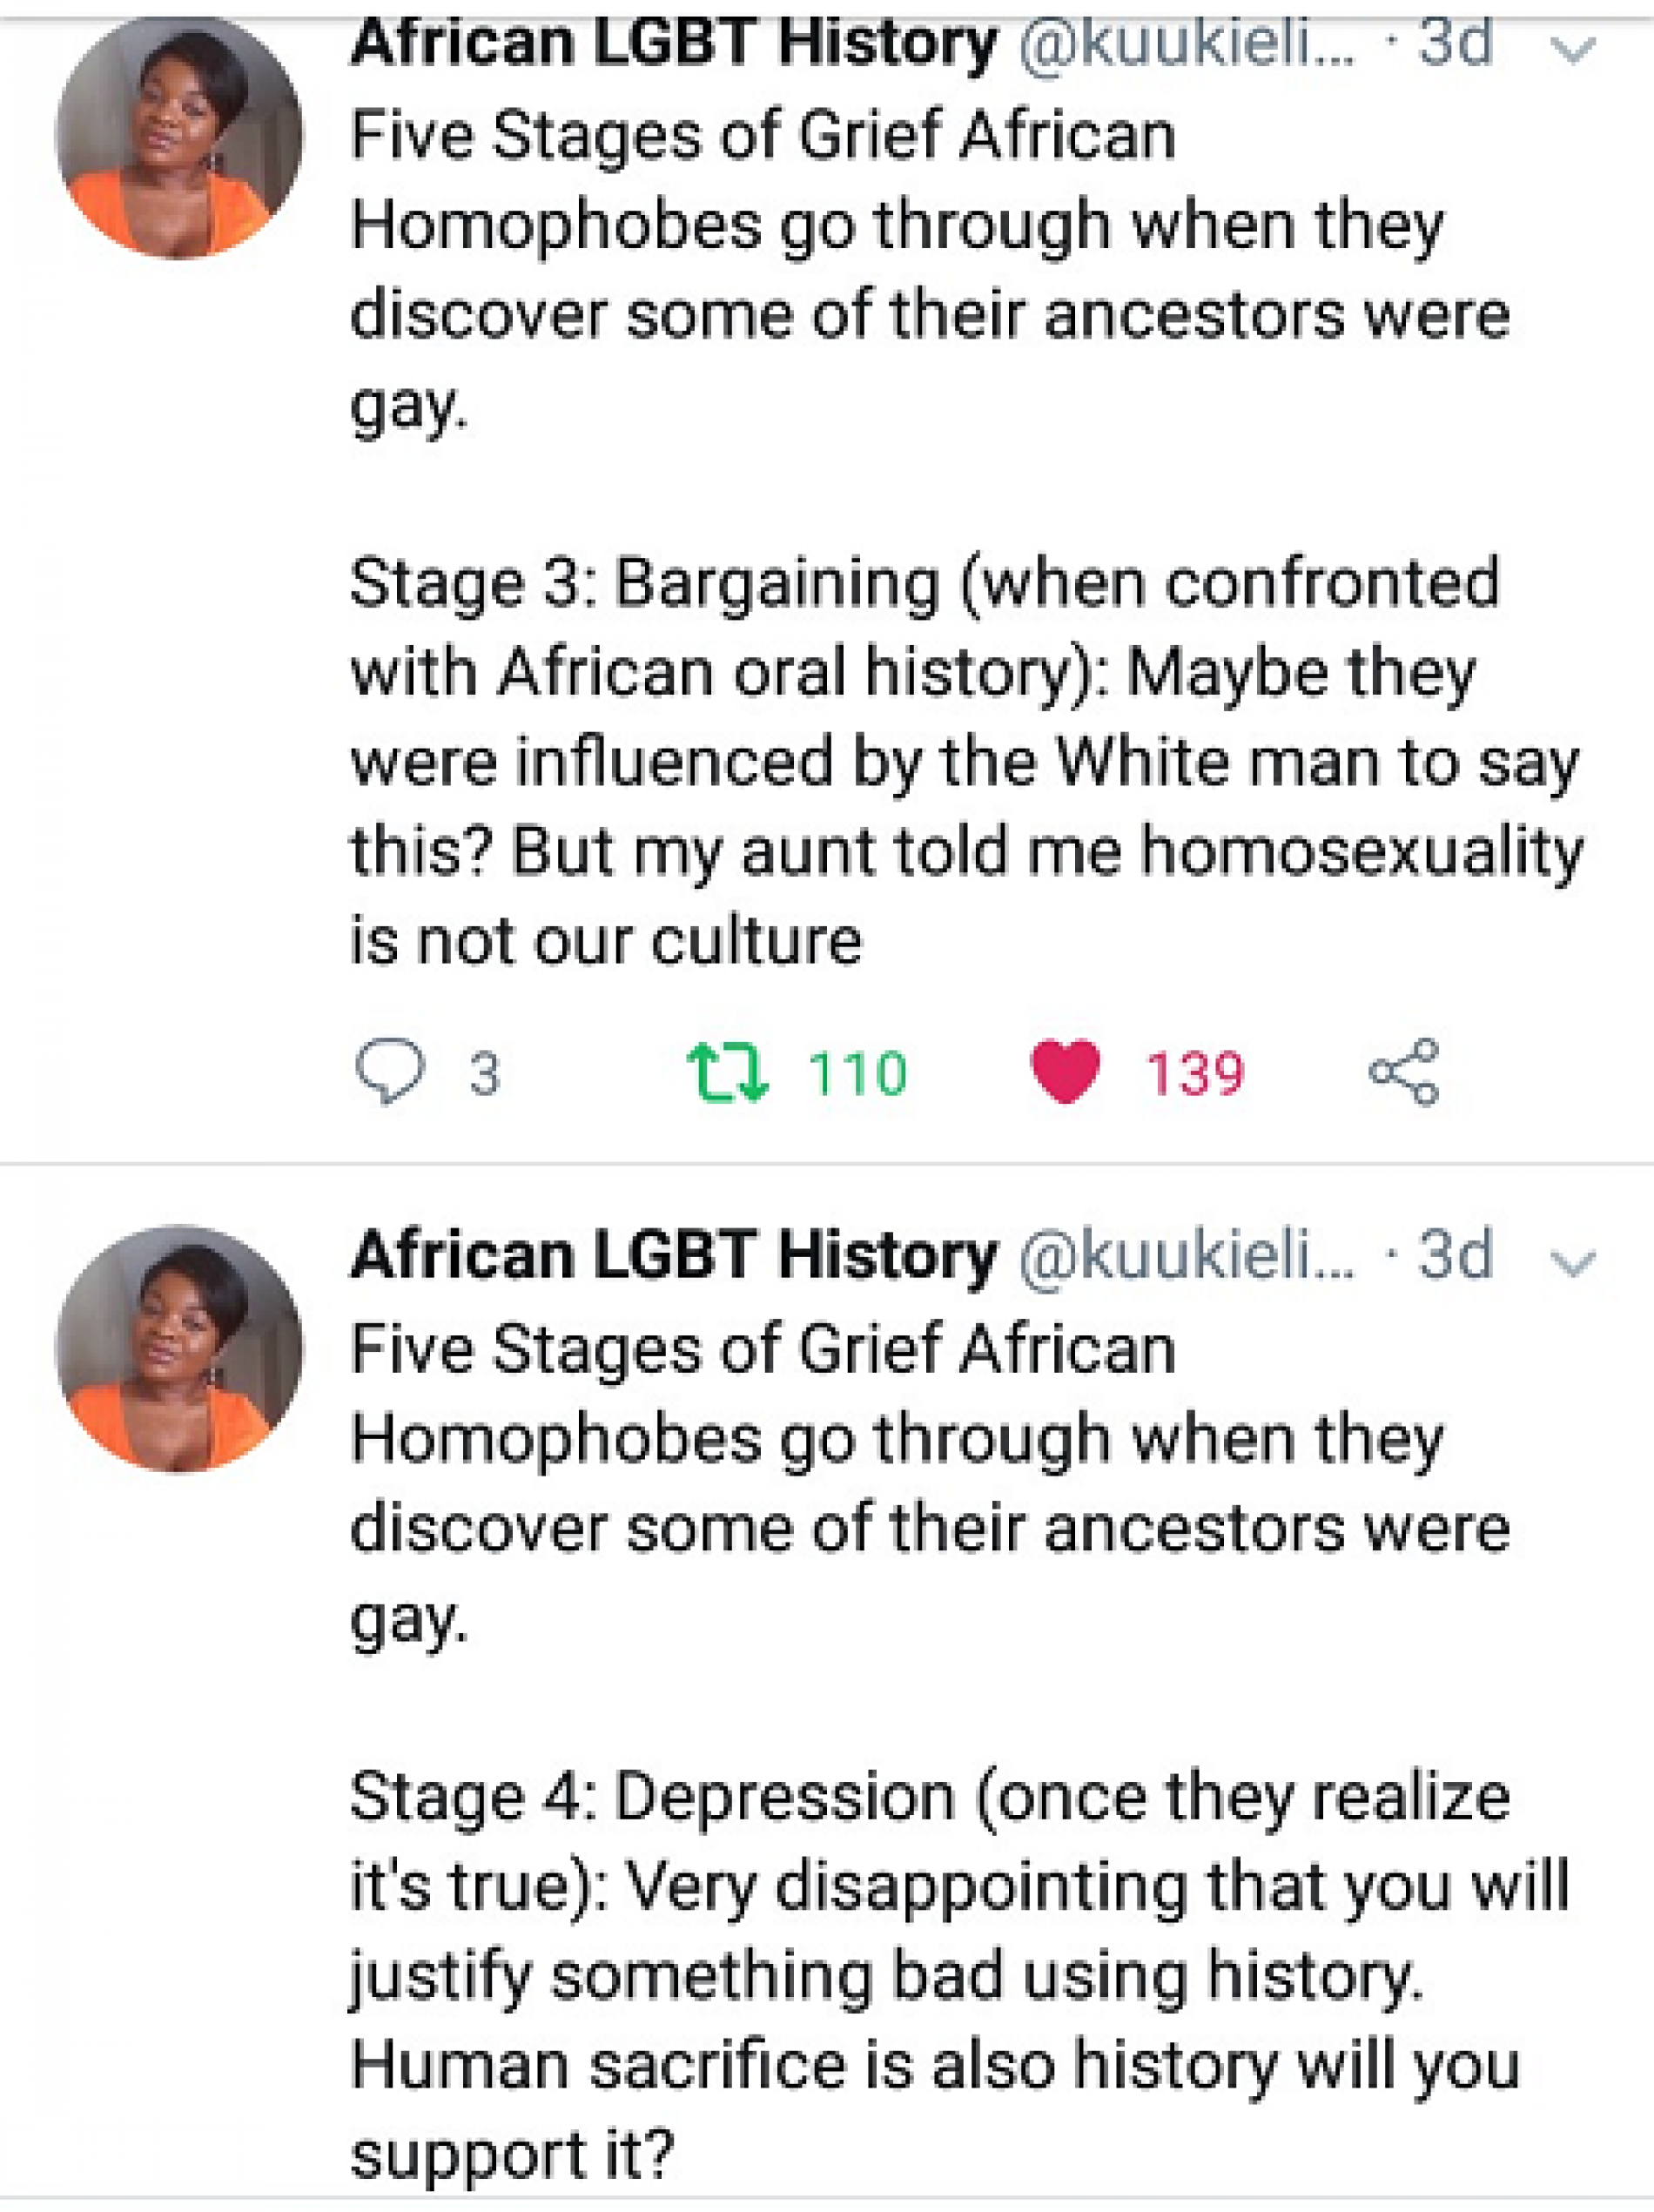 Tweet: Stages of Grief for the African Homophobe